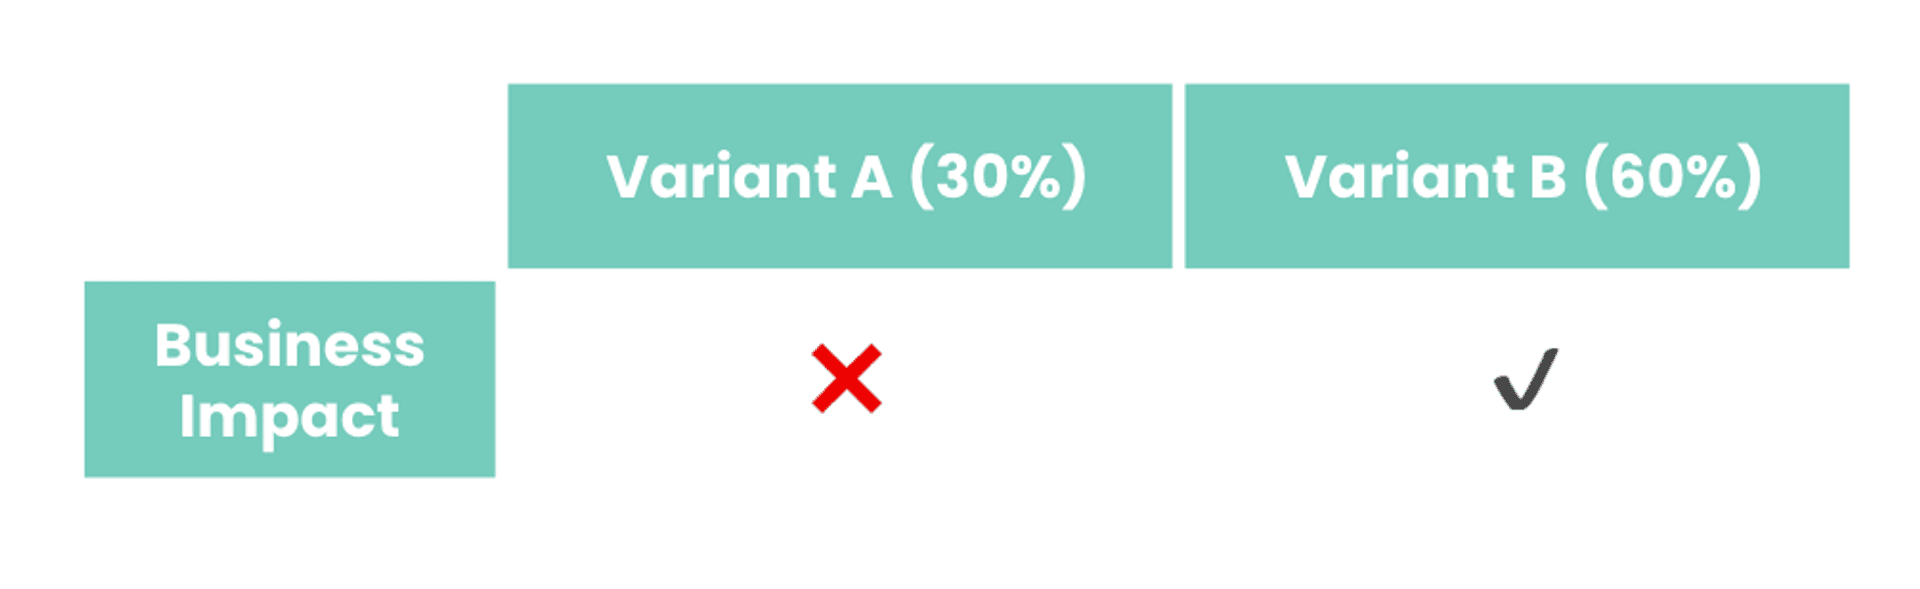 Results of A/B test